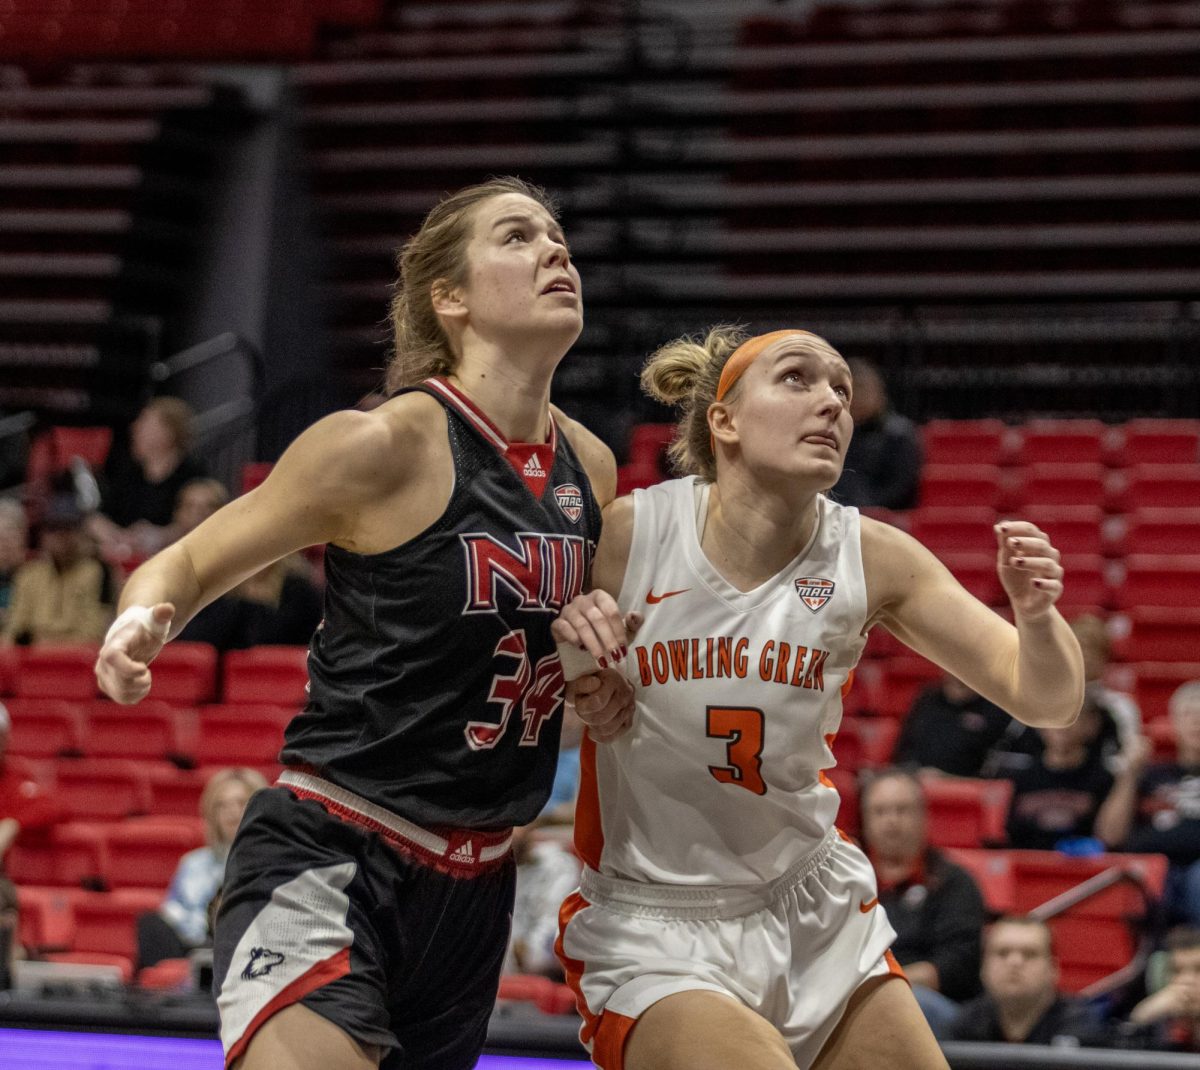 Senior forward Brooke Stonebraker (34) attempts to box out Bowling Green State University senior forward Sophie Dziekan (3). Stonebraker scored 13 points in a 82-73 loss to the Falcons Saturday. (Tim Dodge | Northern Star)